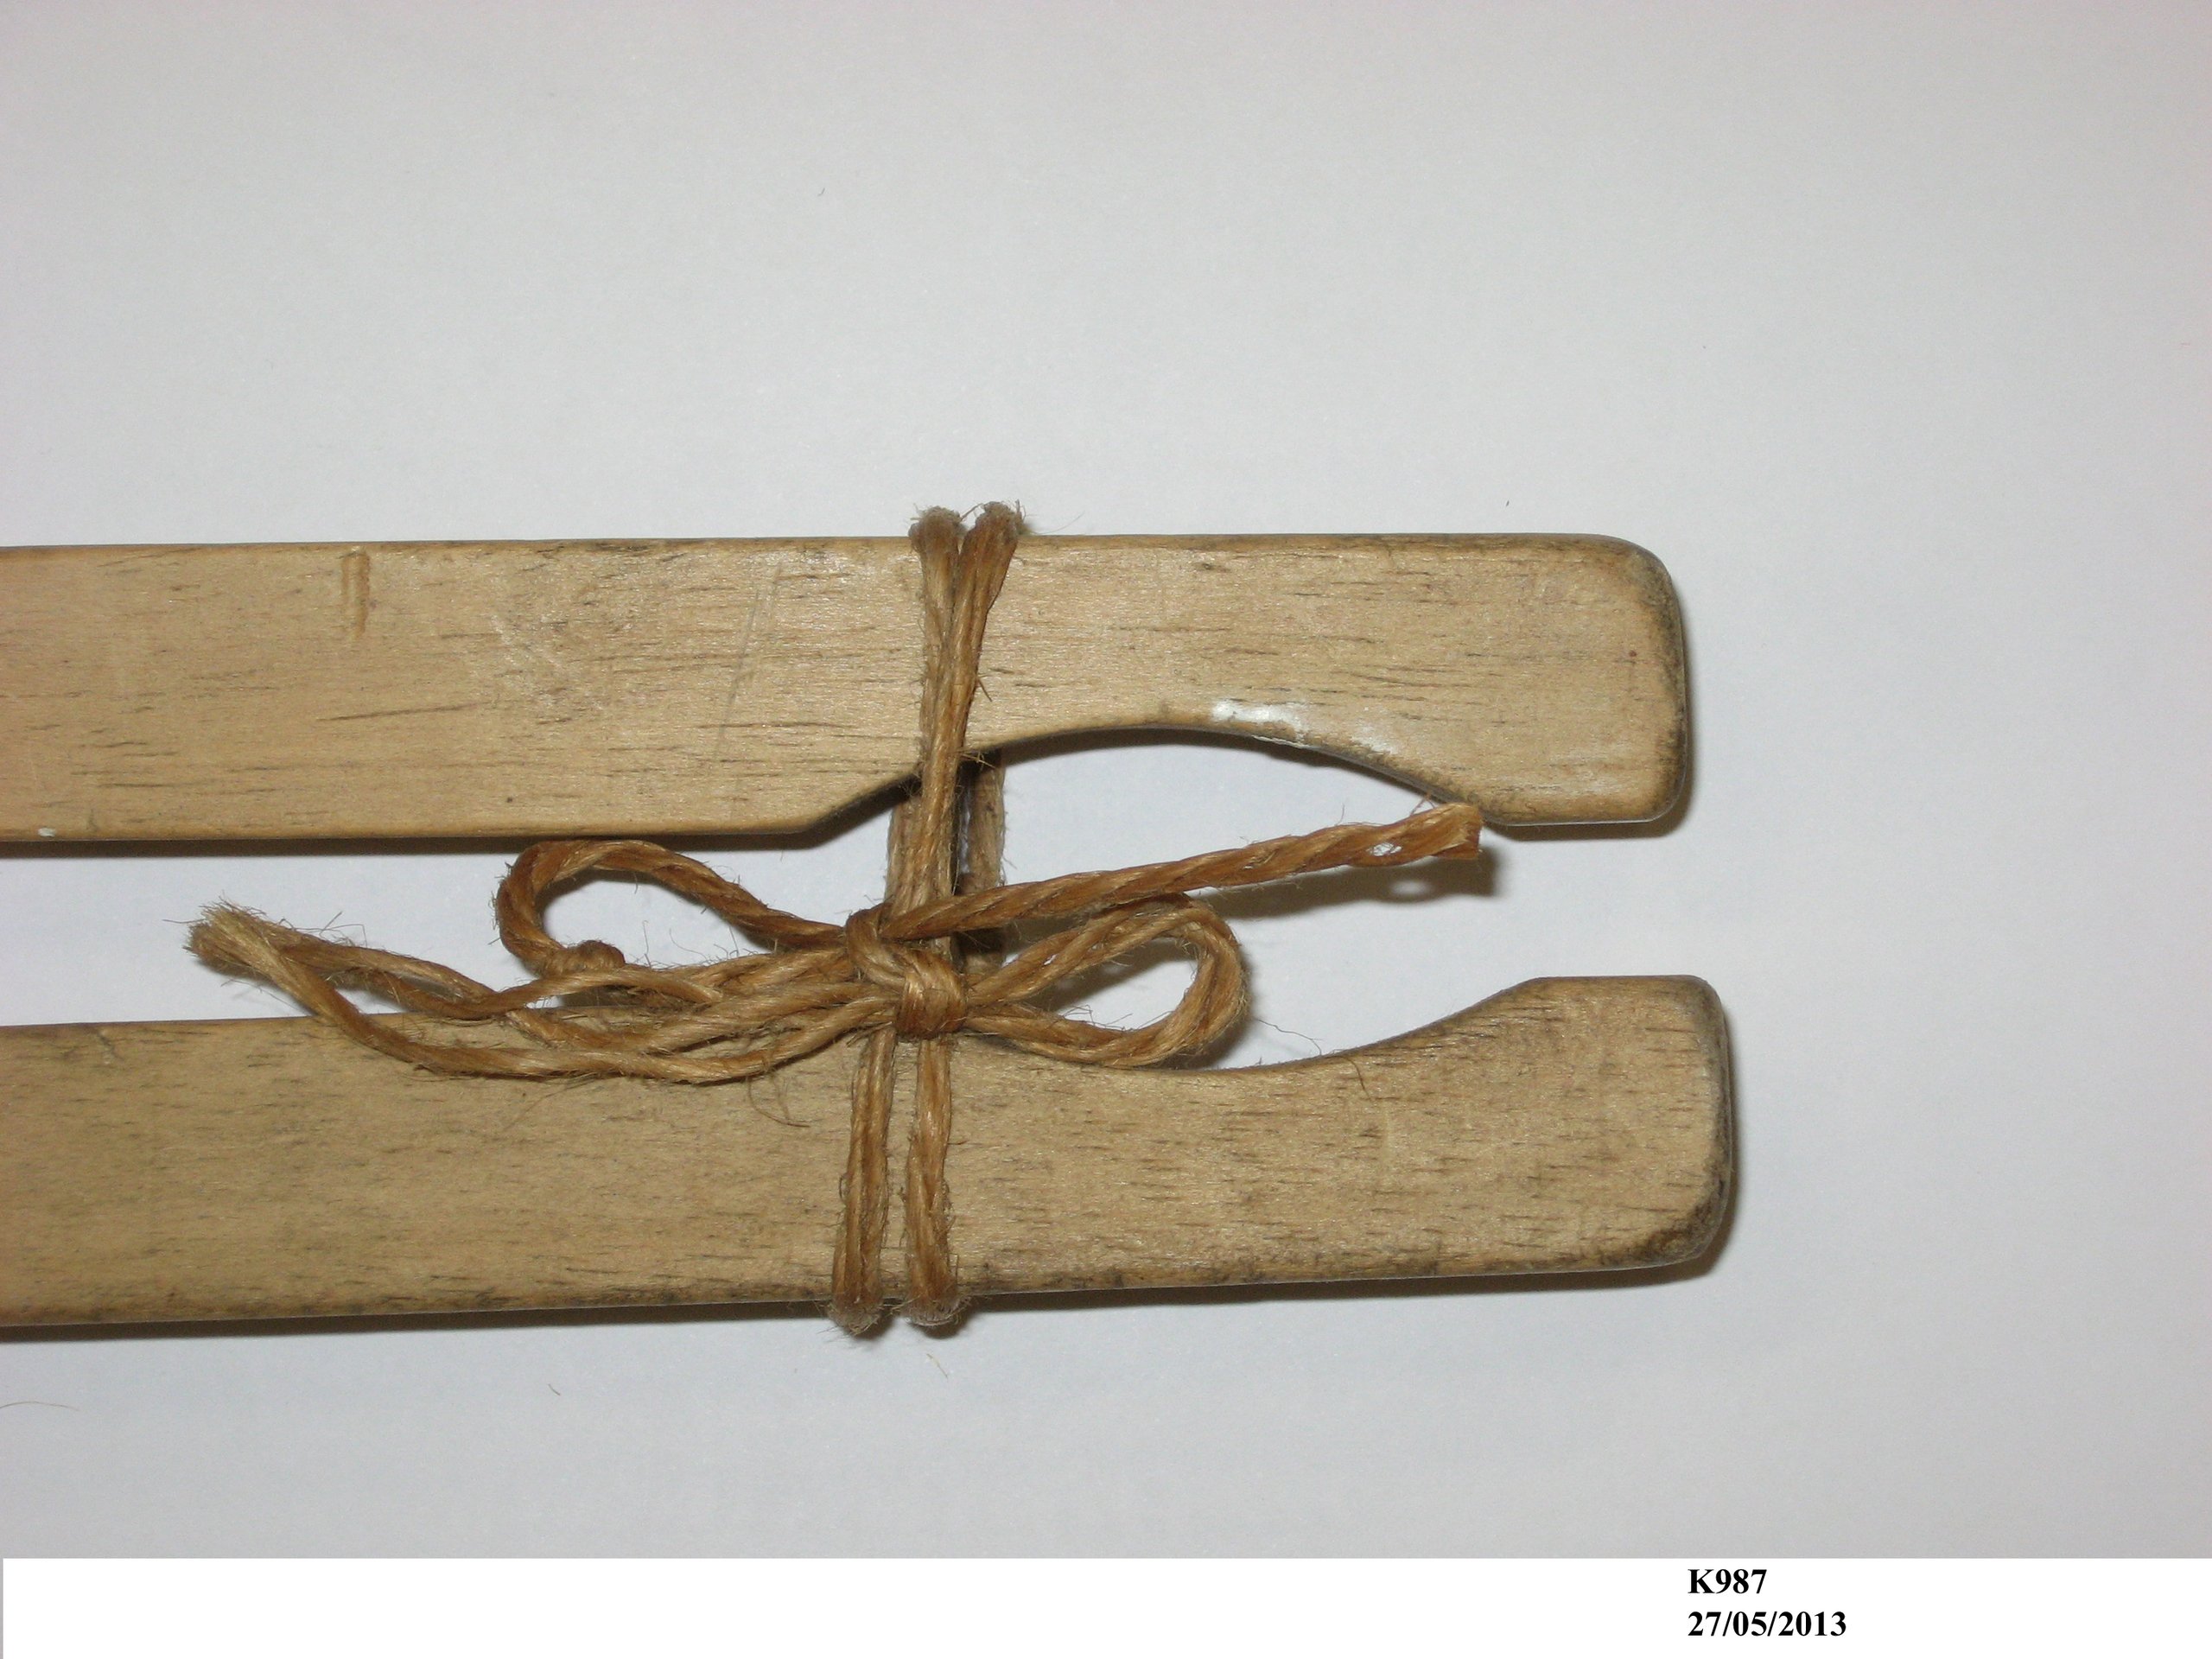 A pair of wooden laundry tongs.